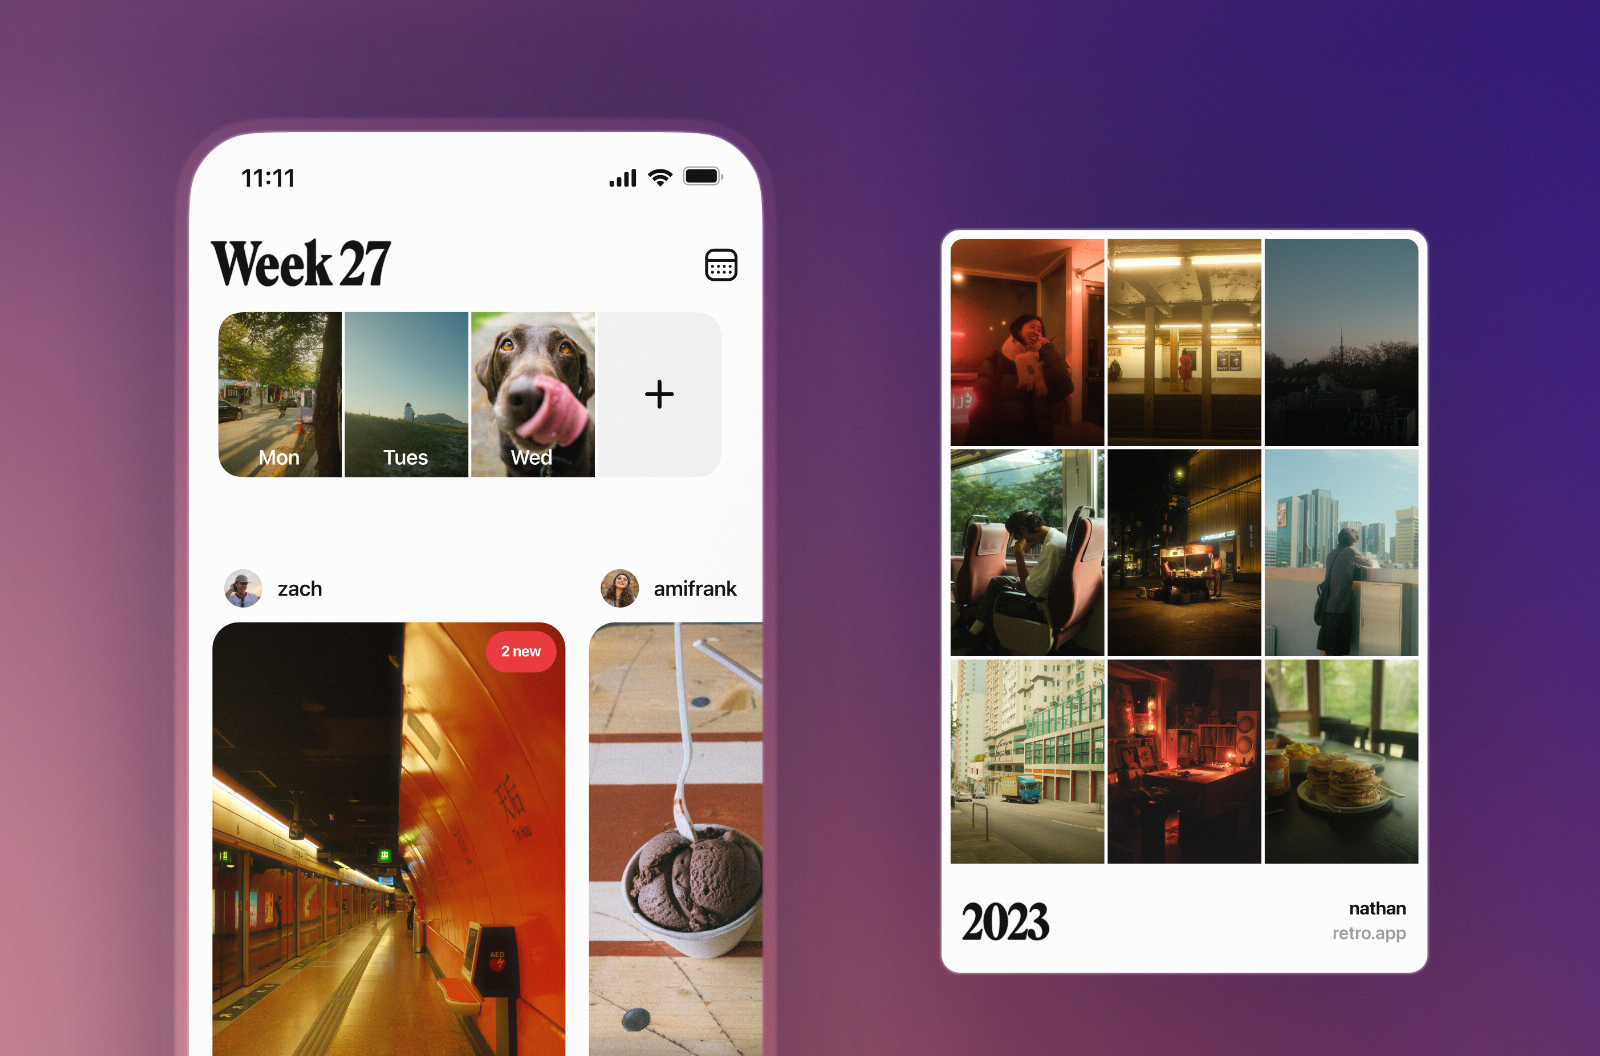 Retro lets you create recaps of your most memorable photos and send the best ones as postcards